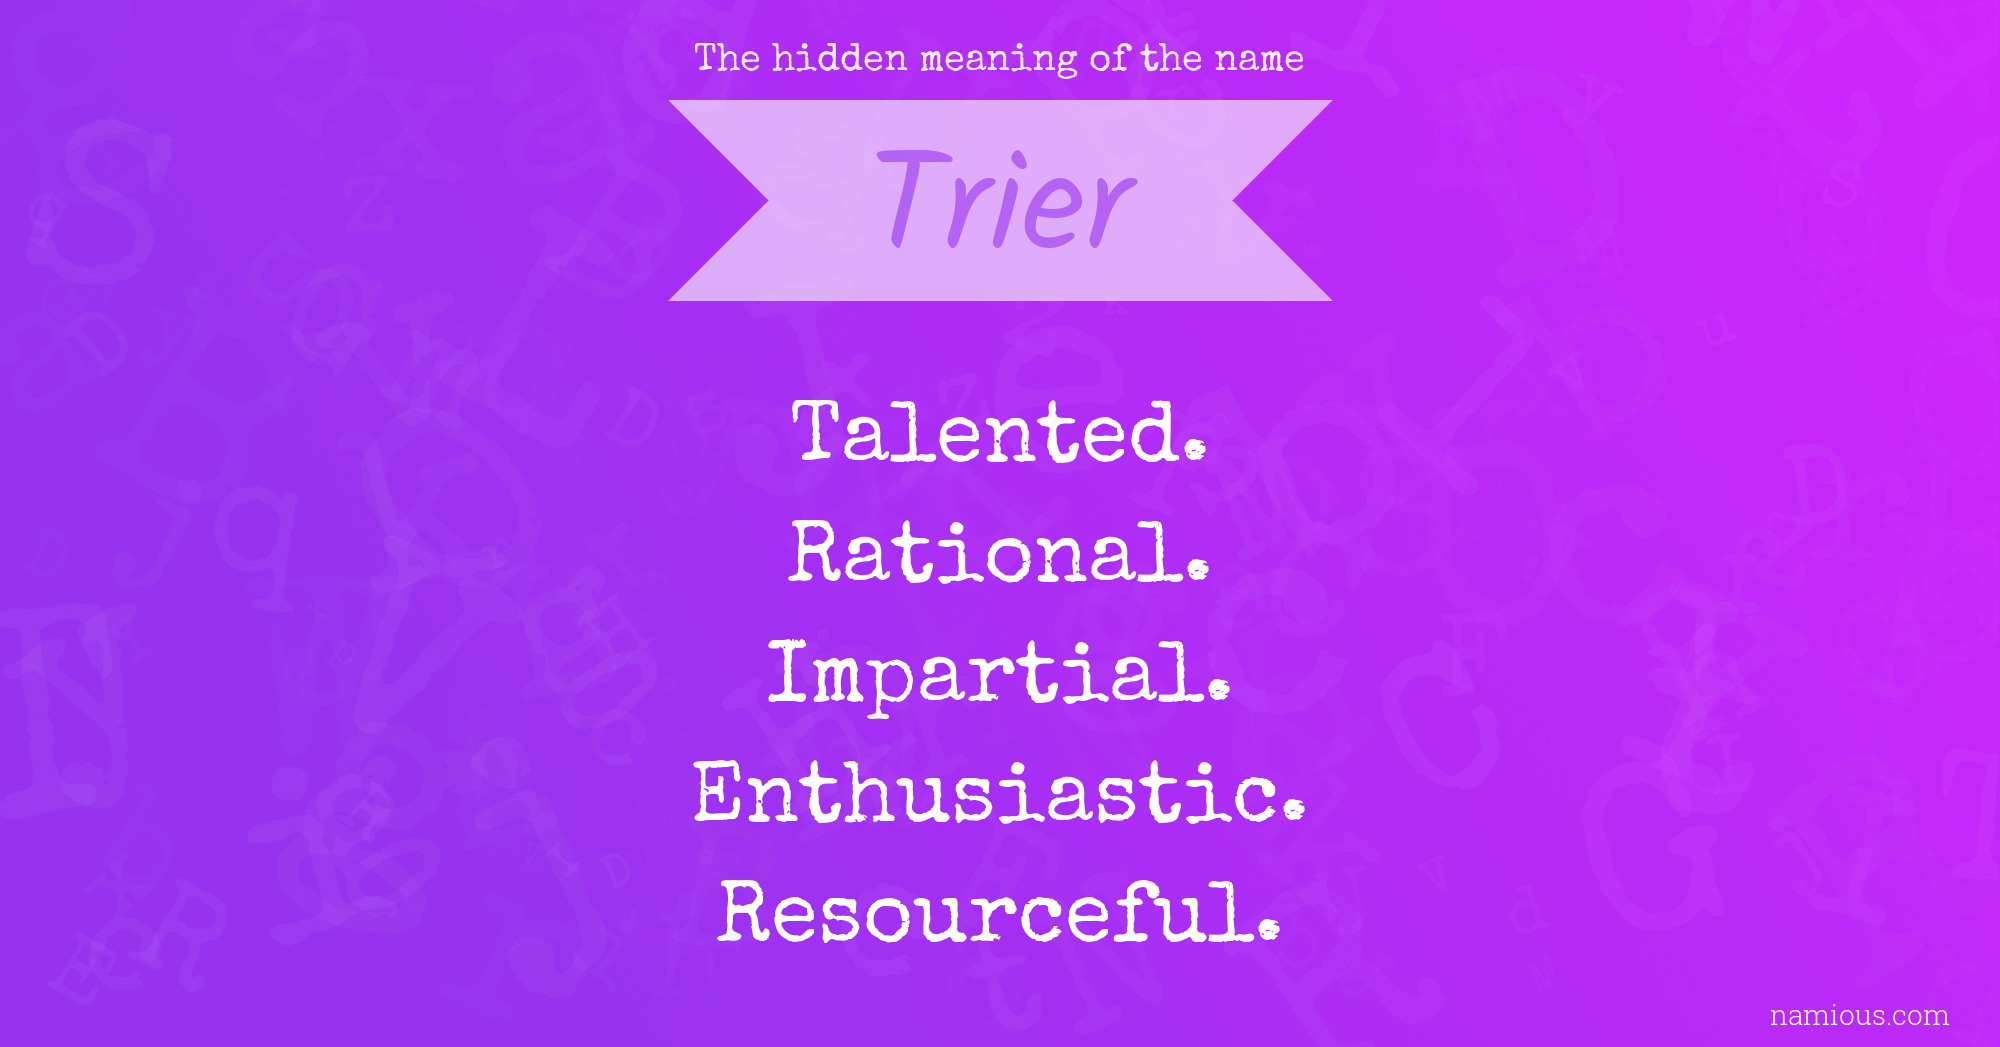 The hidden meaning of the name Trier